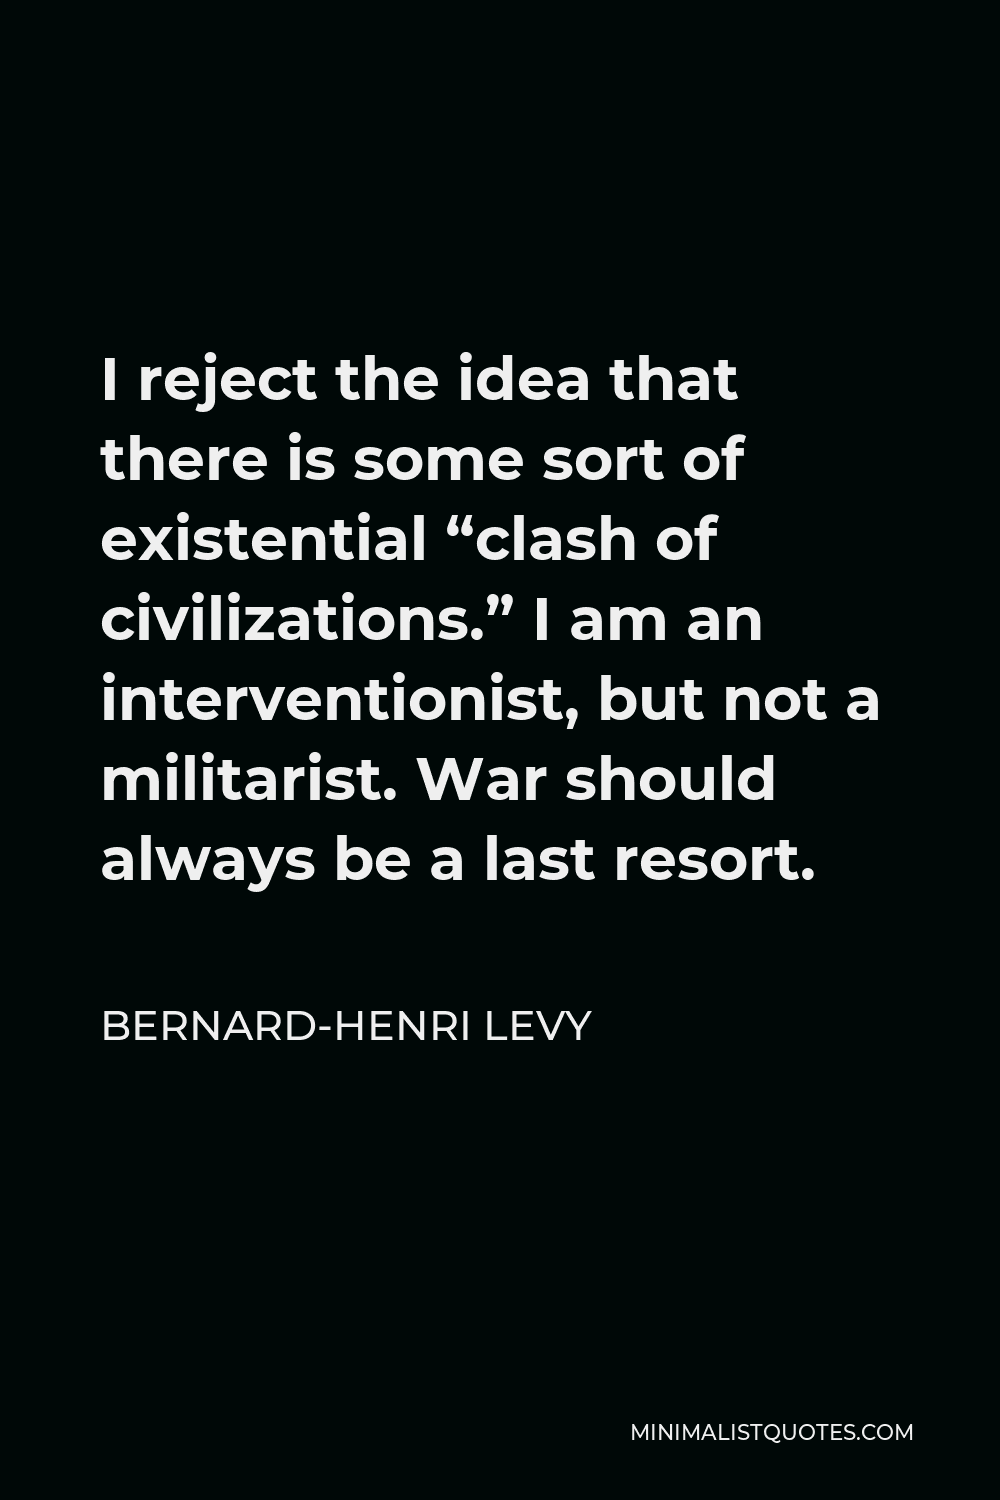 Bernard-Henri Levy Quote - I reject the idea that there is some sort of existential “clash of civilizations.” I am an interventionist, but not a militarist. War should always be a last resort.